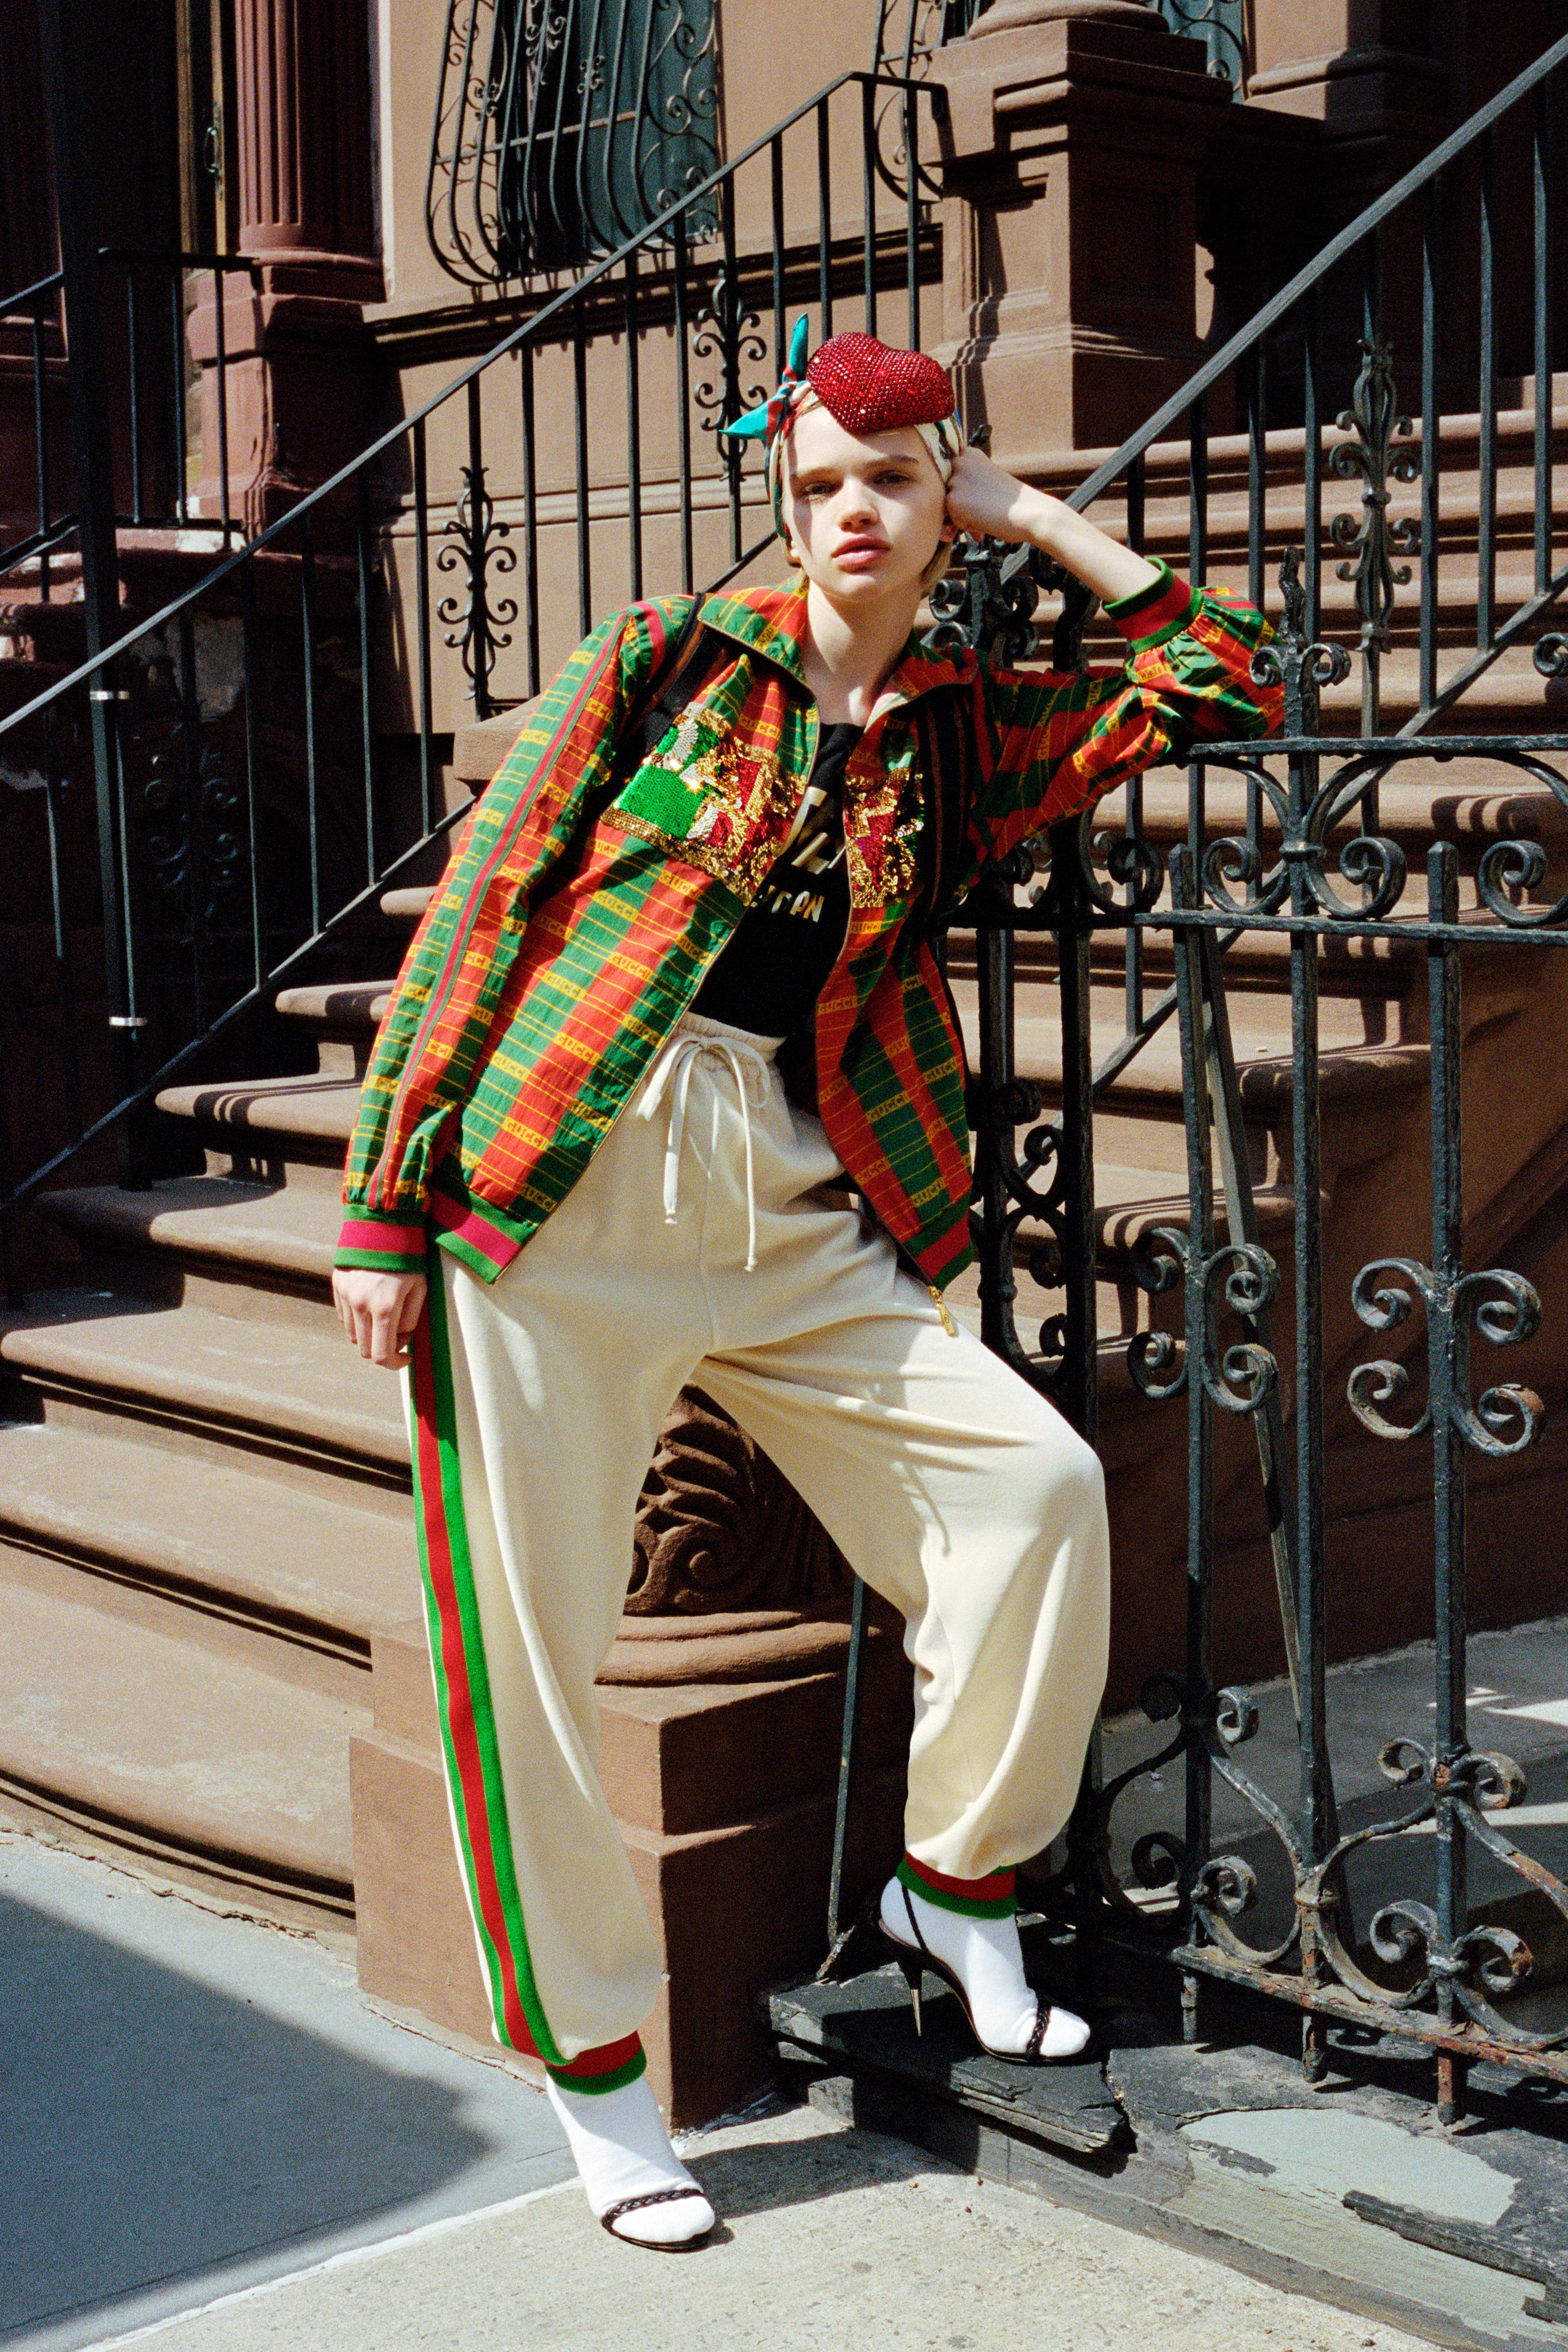 Gucci and Dapper Dan have dropped their first collection - ICON